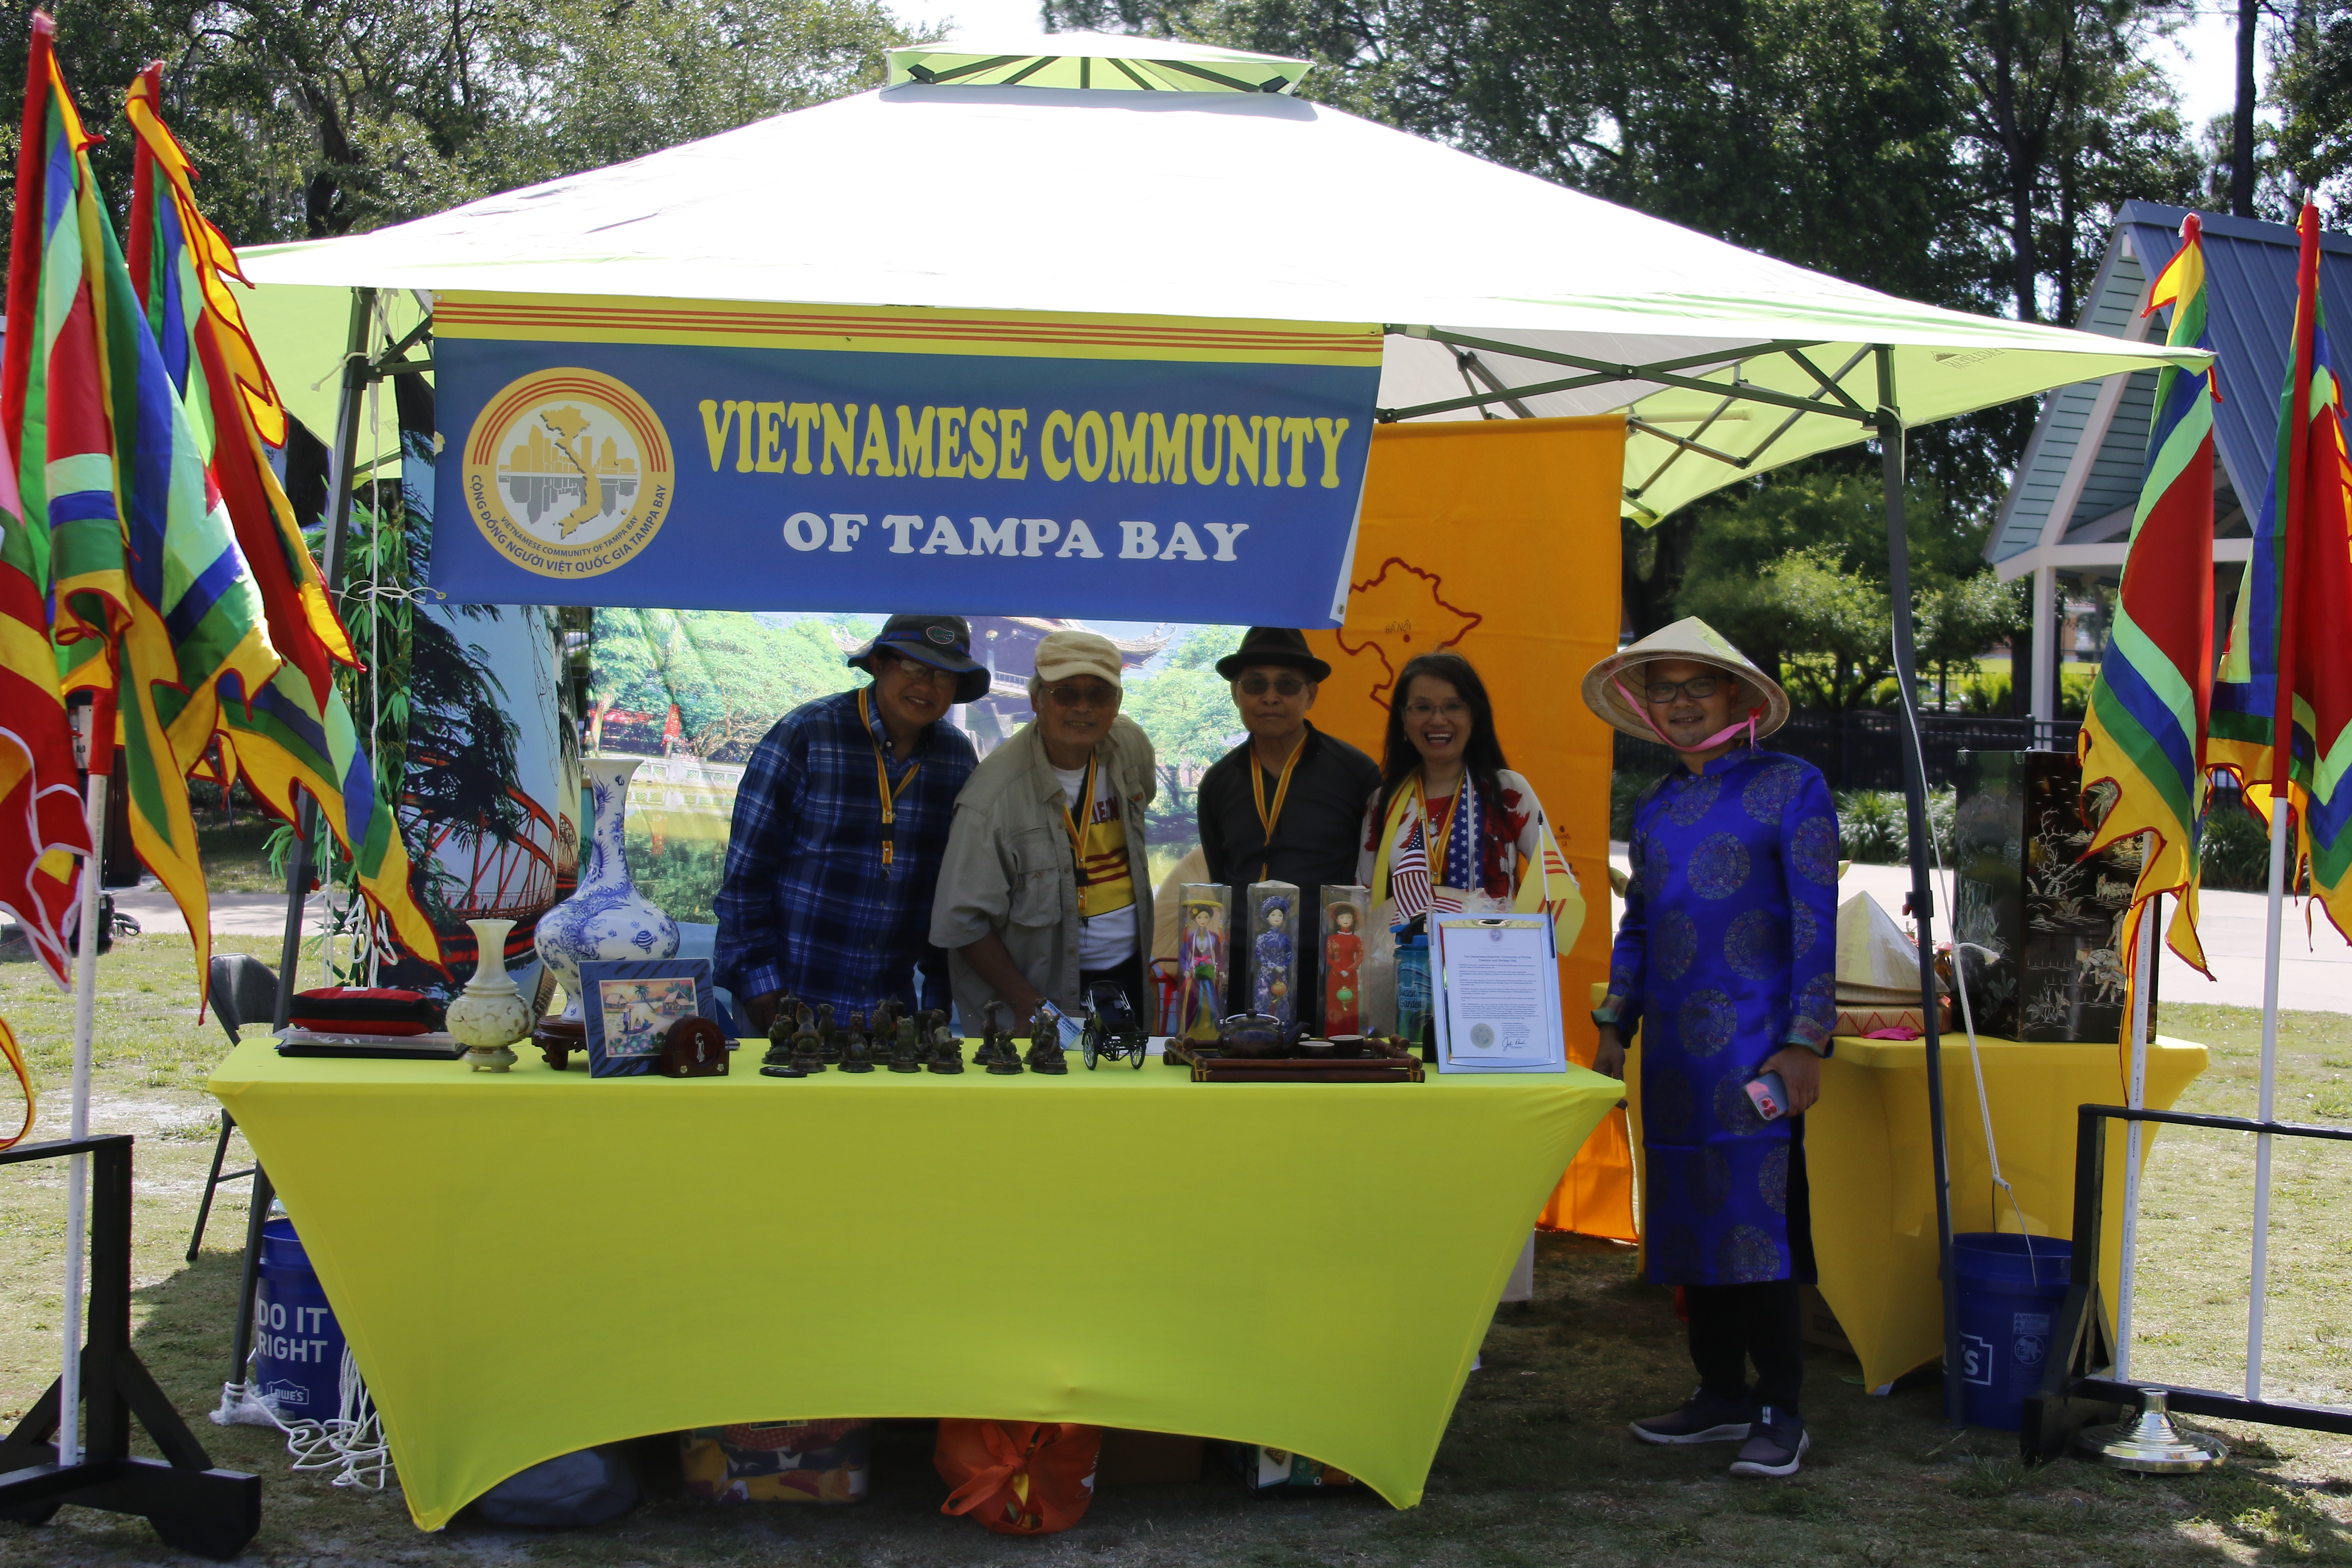 The Vietnamese Community of Tampa Bay Tent